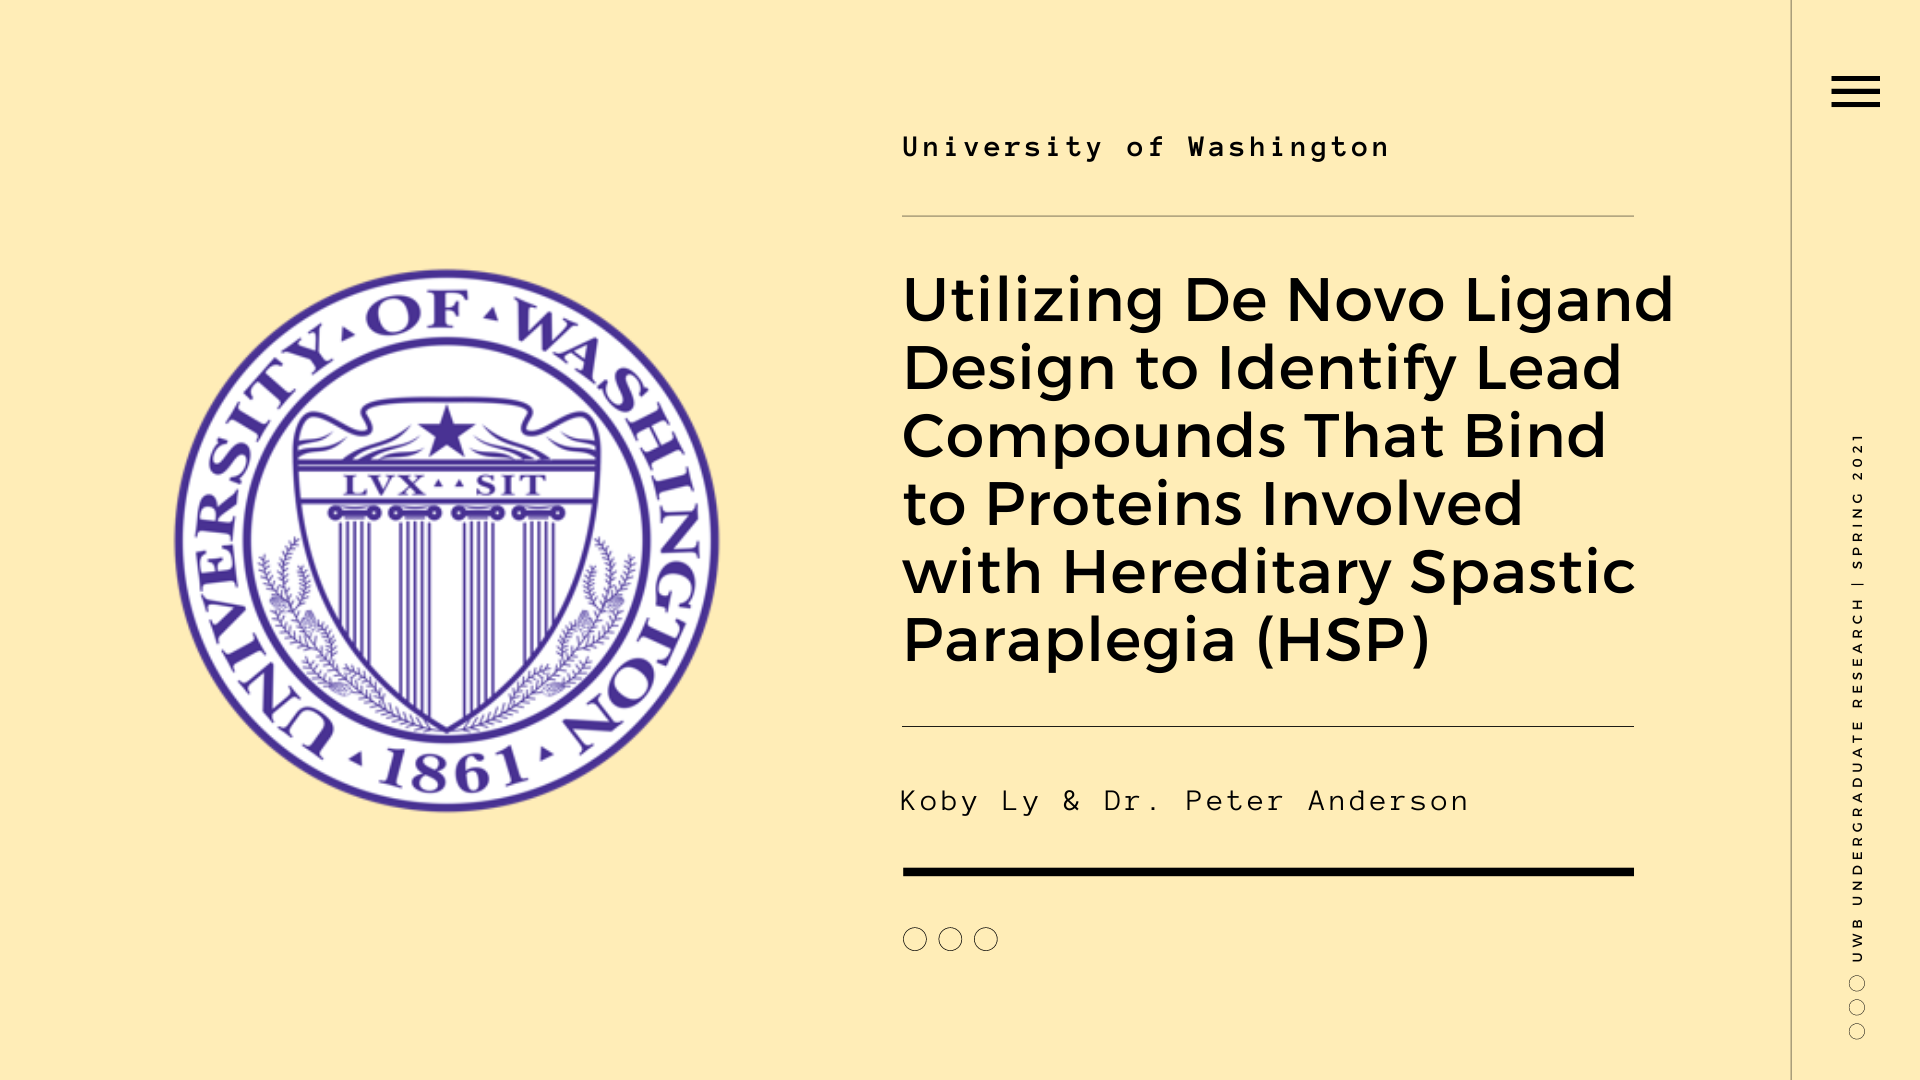 Utilizing De Novo Ligand Design to Identify Lead Compounds That Bind to Proteins Involved with Hereditary Spastic Paraplegia Poster